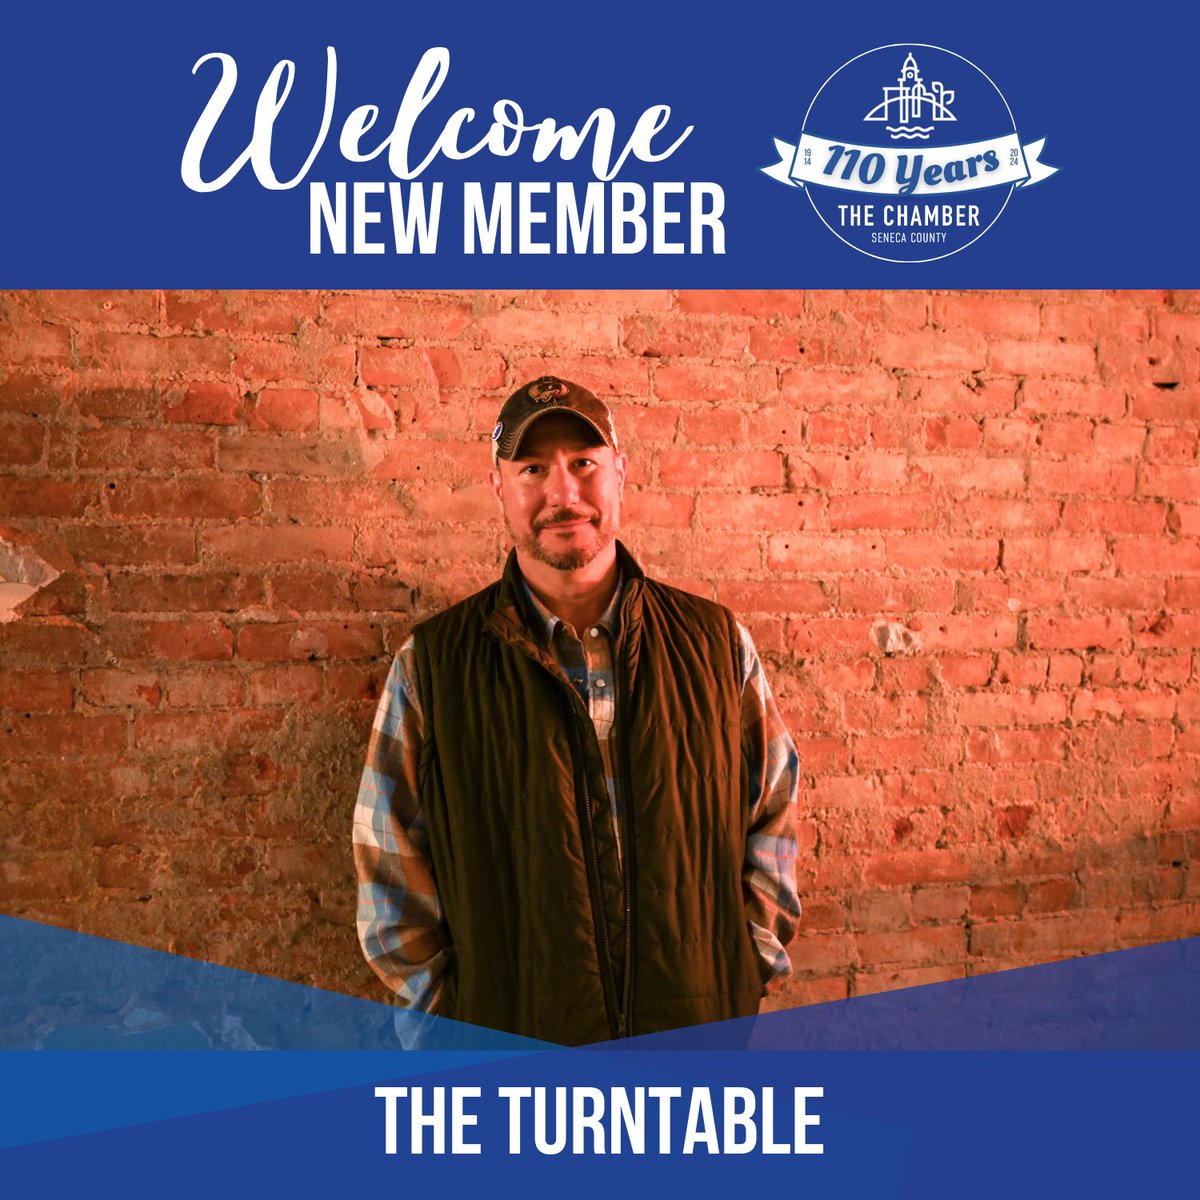 Welcome new member, The Turntable!

Learn more at: ow.ly/9NNT50RjNmz

#NewMemberMonday